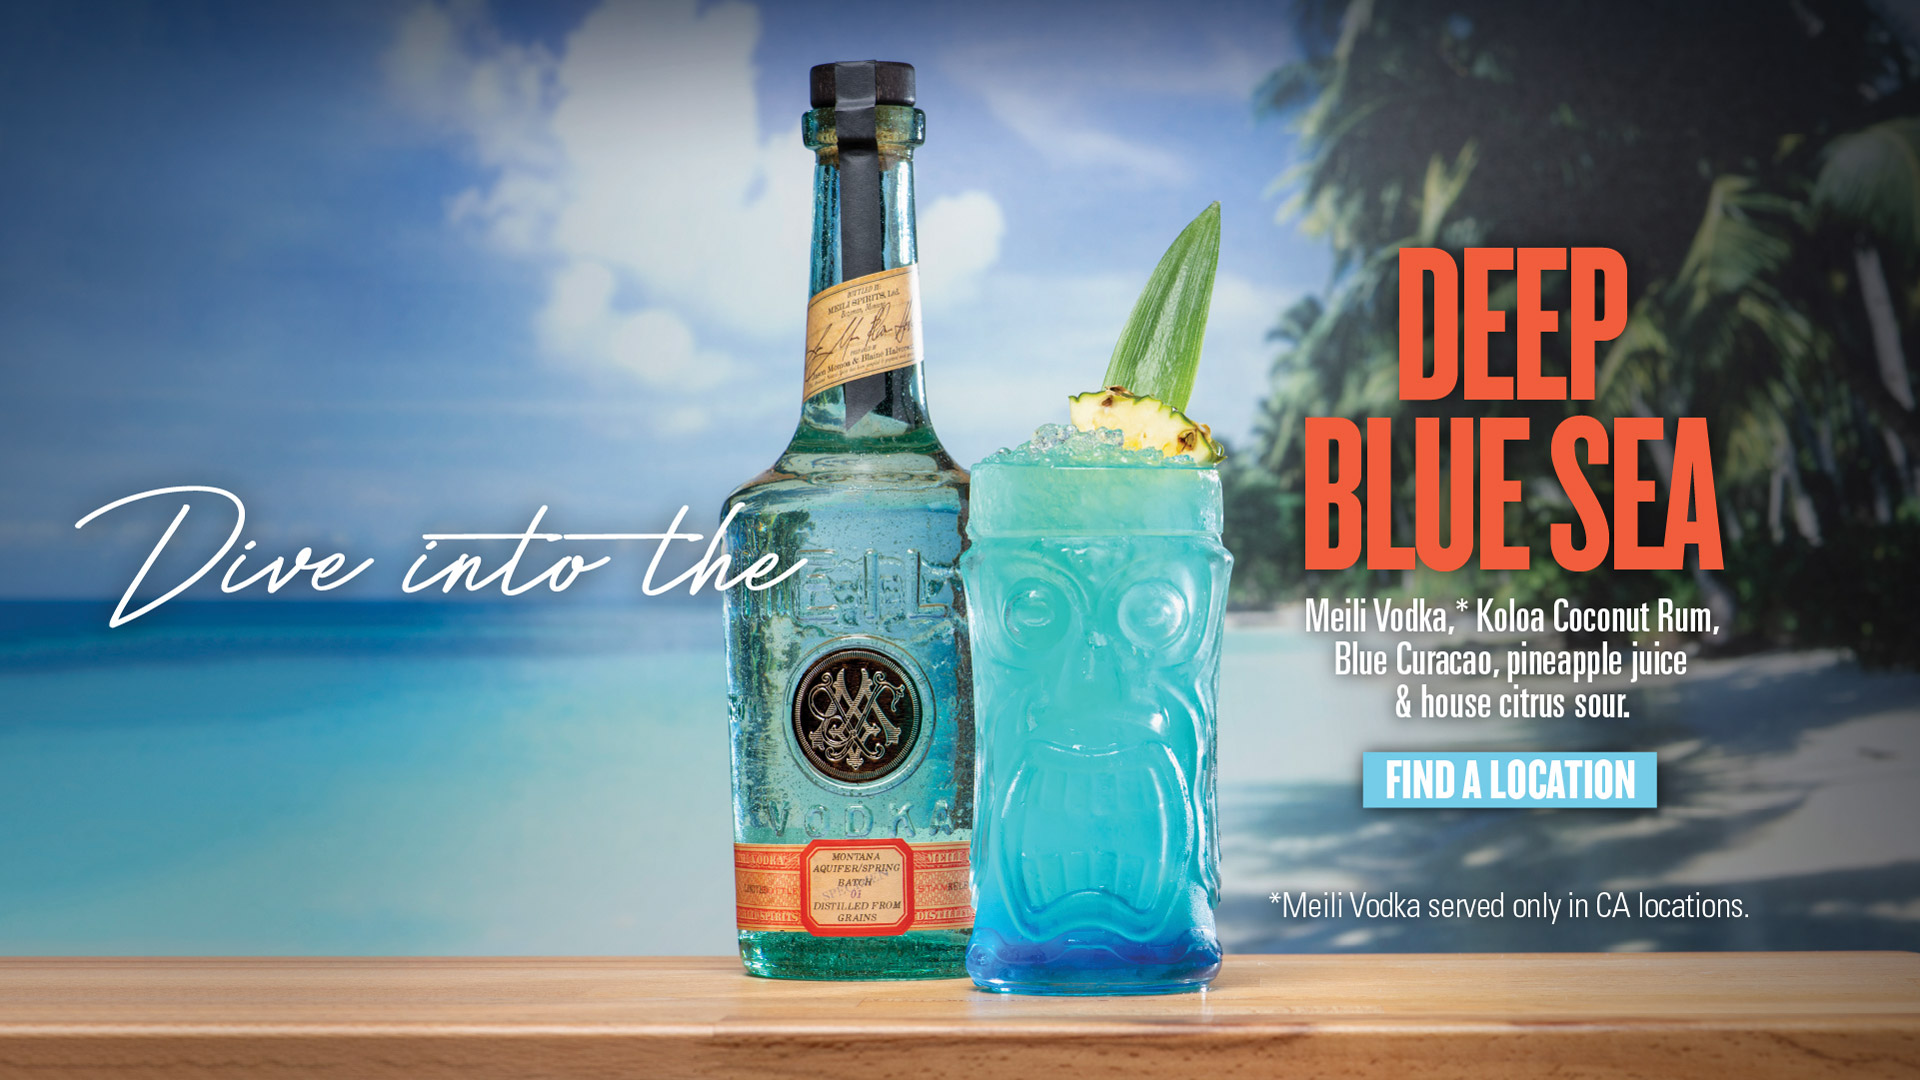 Dive into the DEEP BLUE SEA. Meili Vodka*, Koloa Coconut Rum, Blue Curacoa, pineapple juice & house citrus sour.  Click to Find a Location *Meili Vodka served only in CA locations.